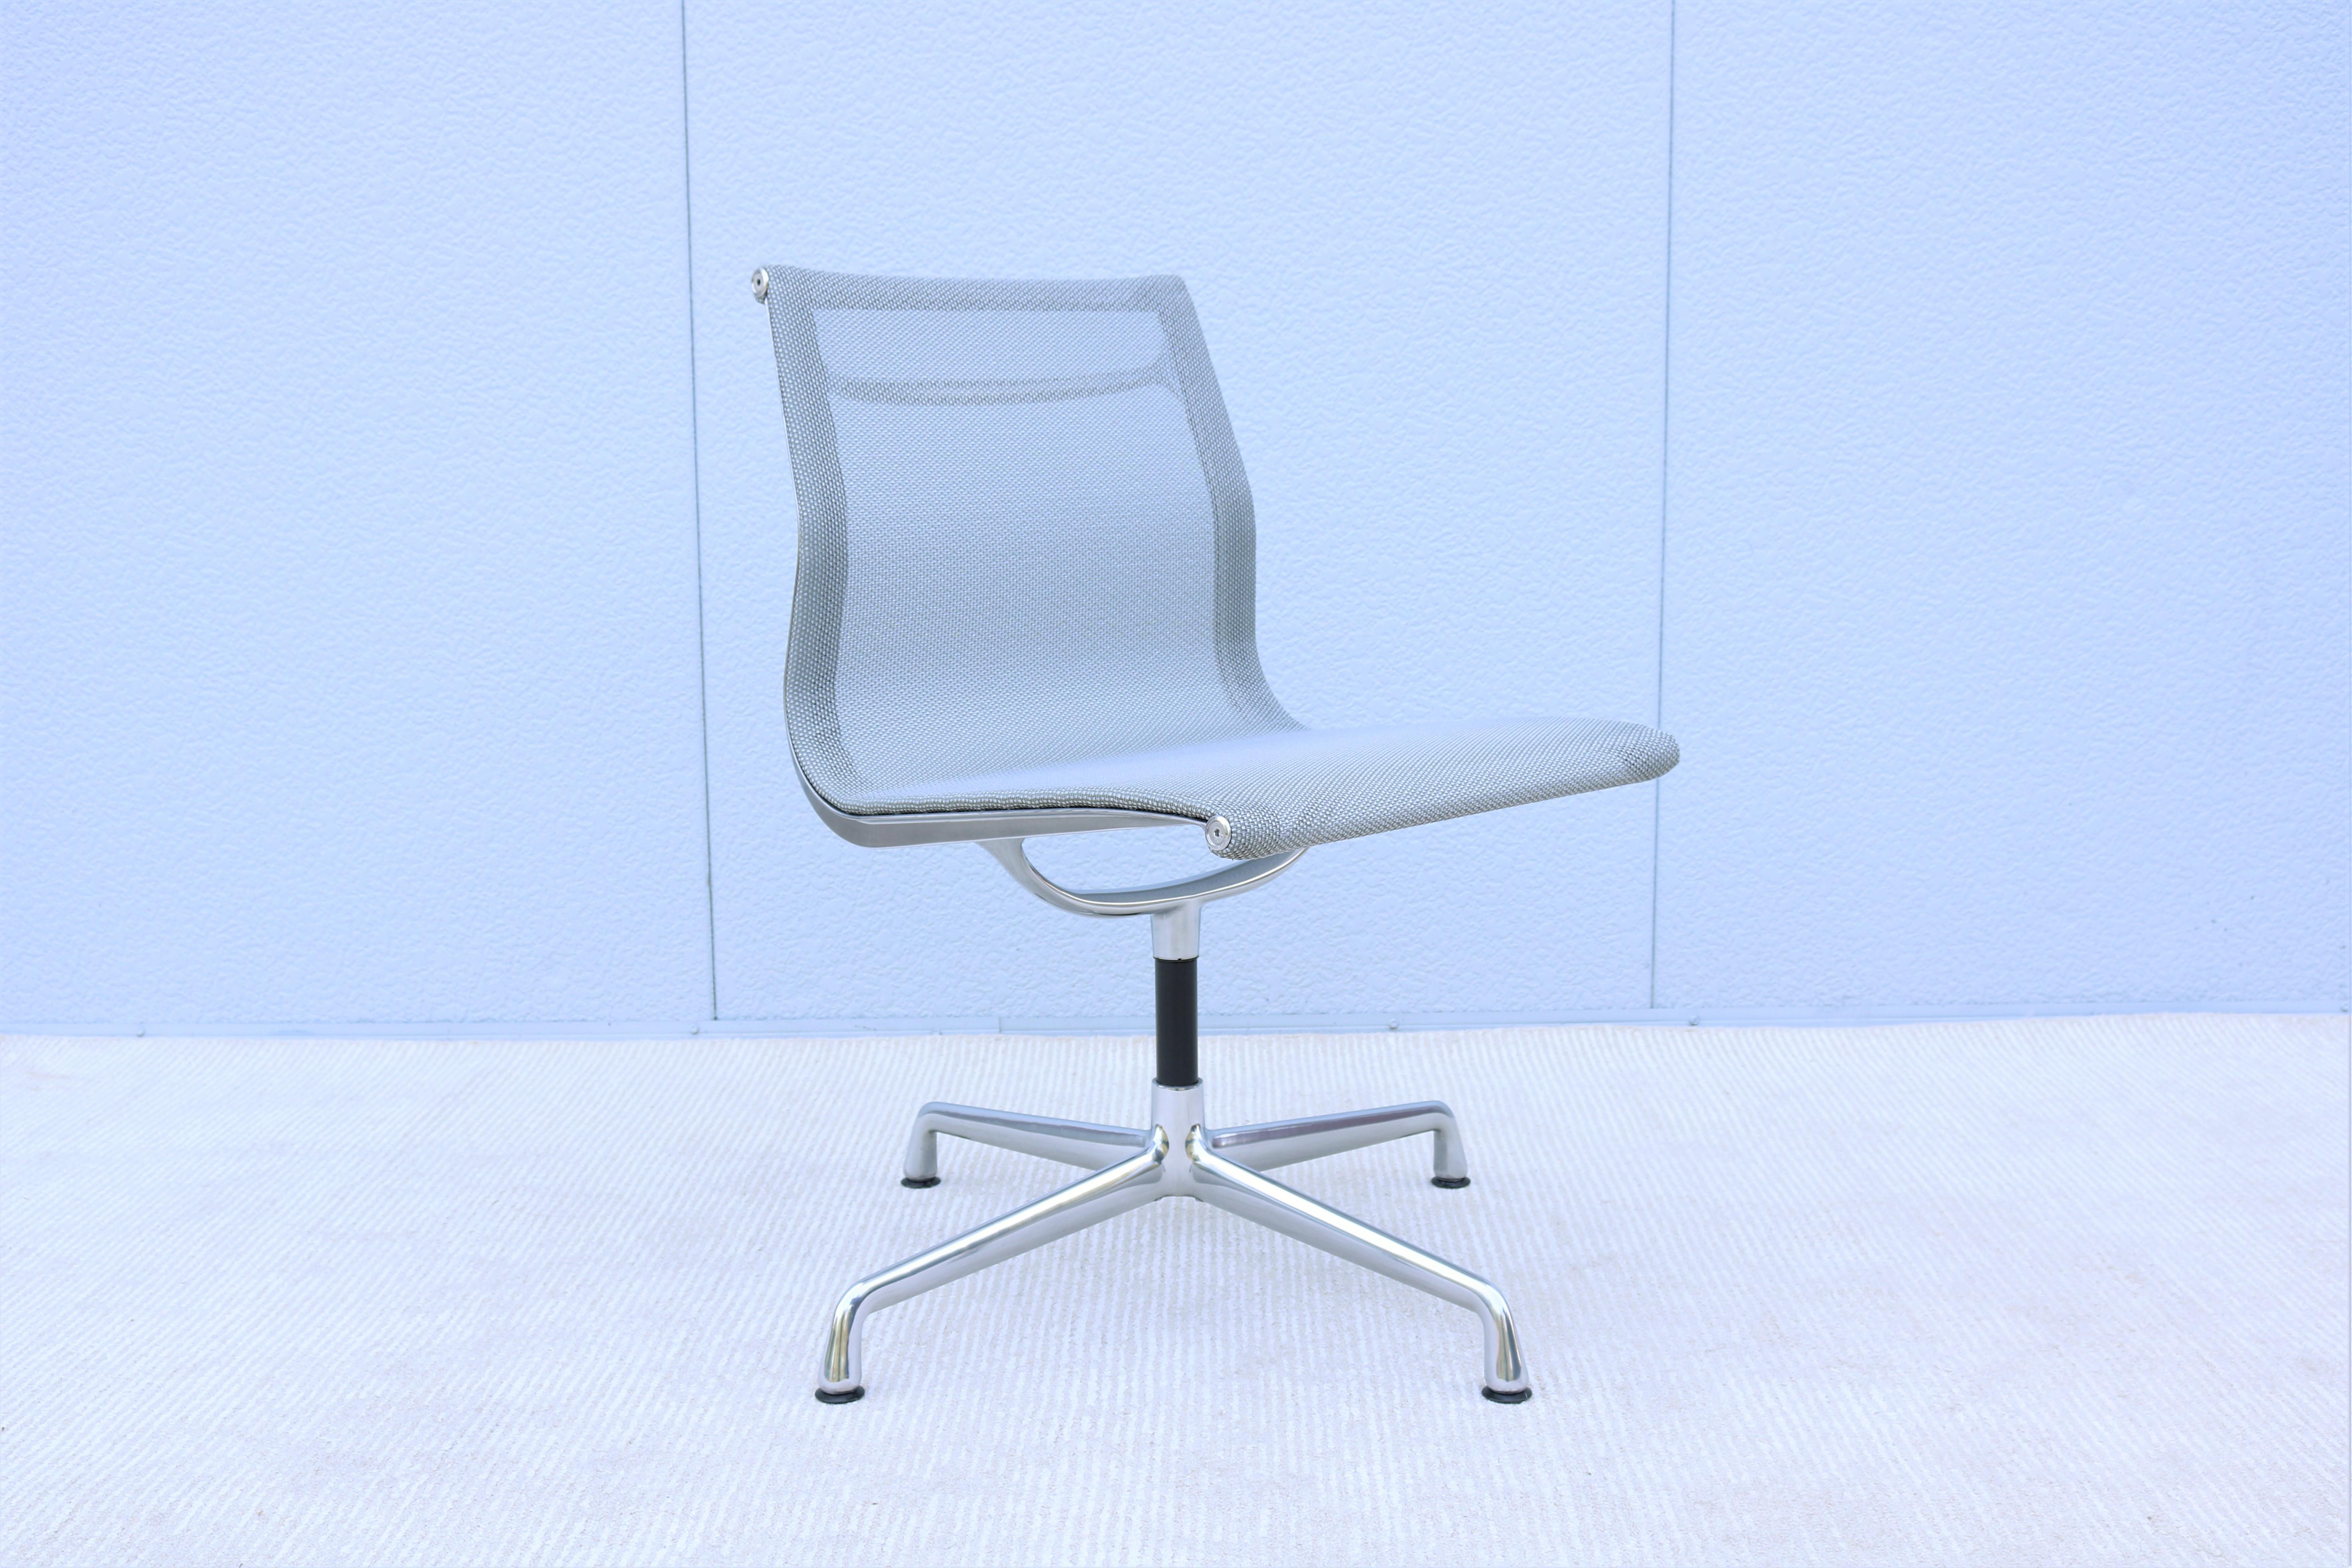 Stunning Authentic Mid-Century Modern Eames Aluminum Group Armless Side Chair.
A timeless design Classic and Contemporary with Innovative comfort features.
One of Herman Miller most popular chairs was designed in 1958 by Charles and Ray